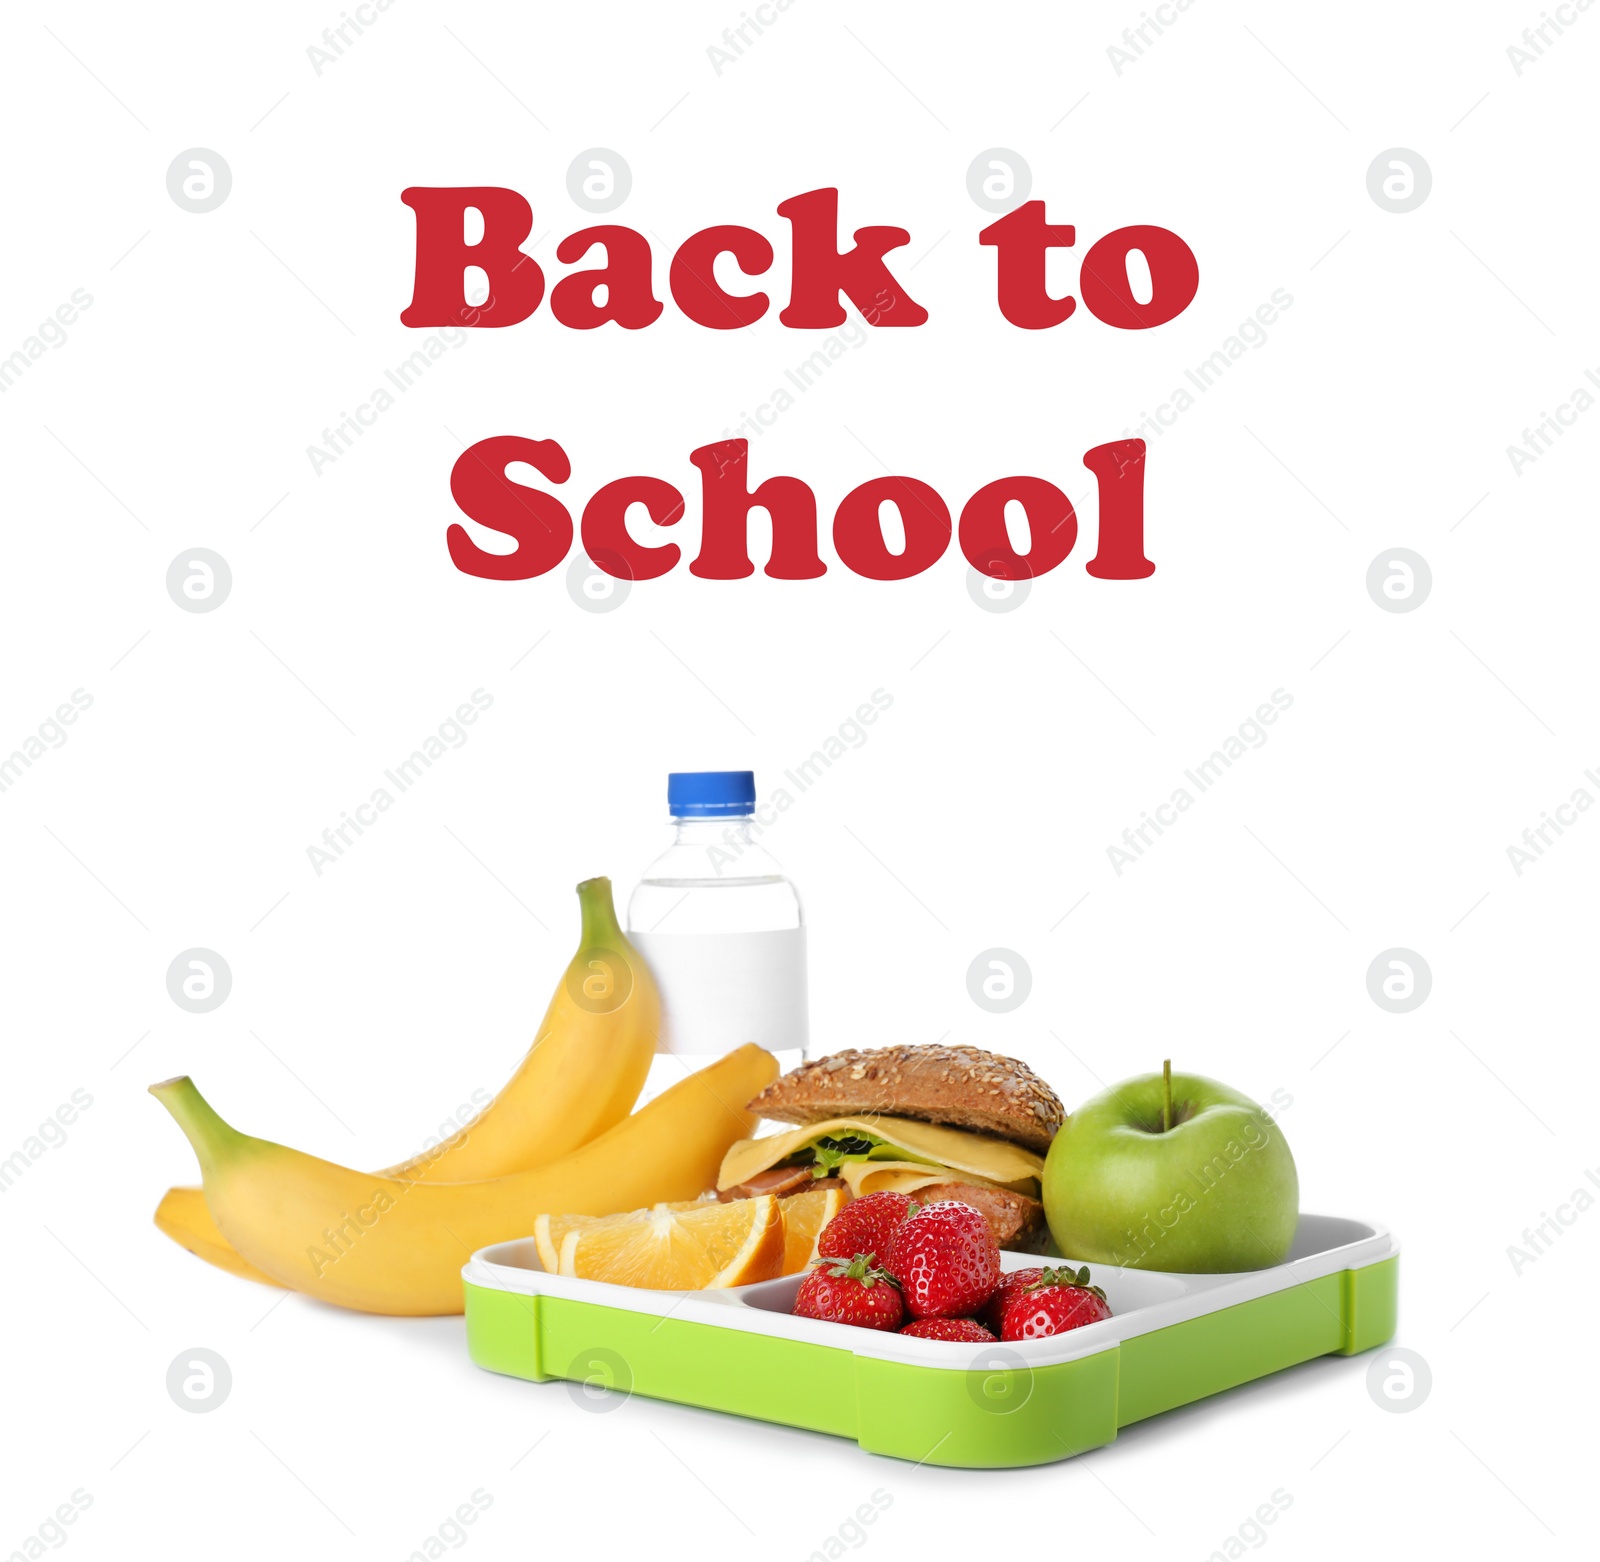 Image of Lunch box with healthy food for schoolchild on white background